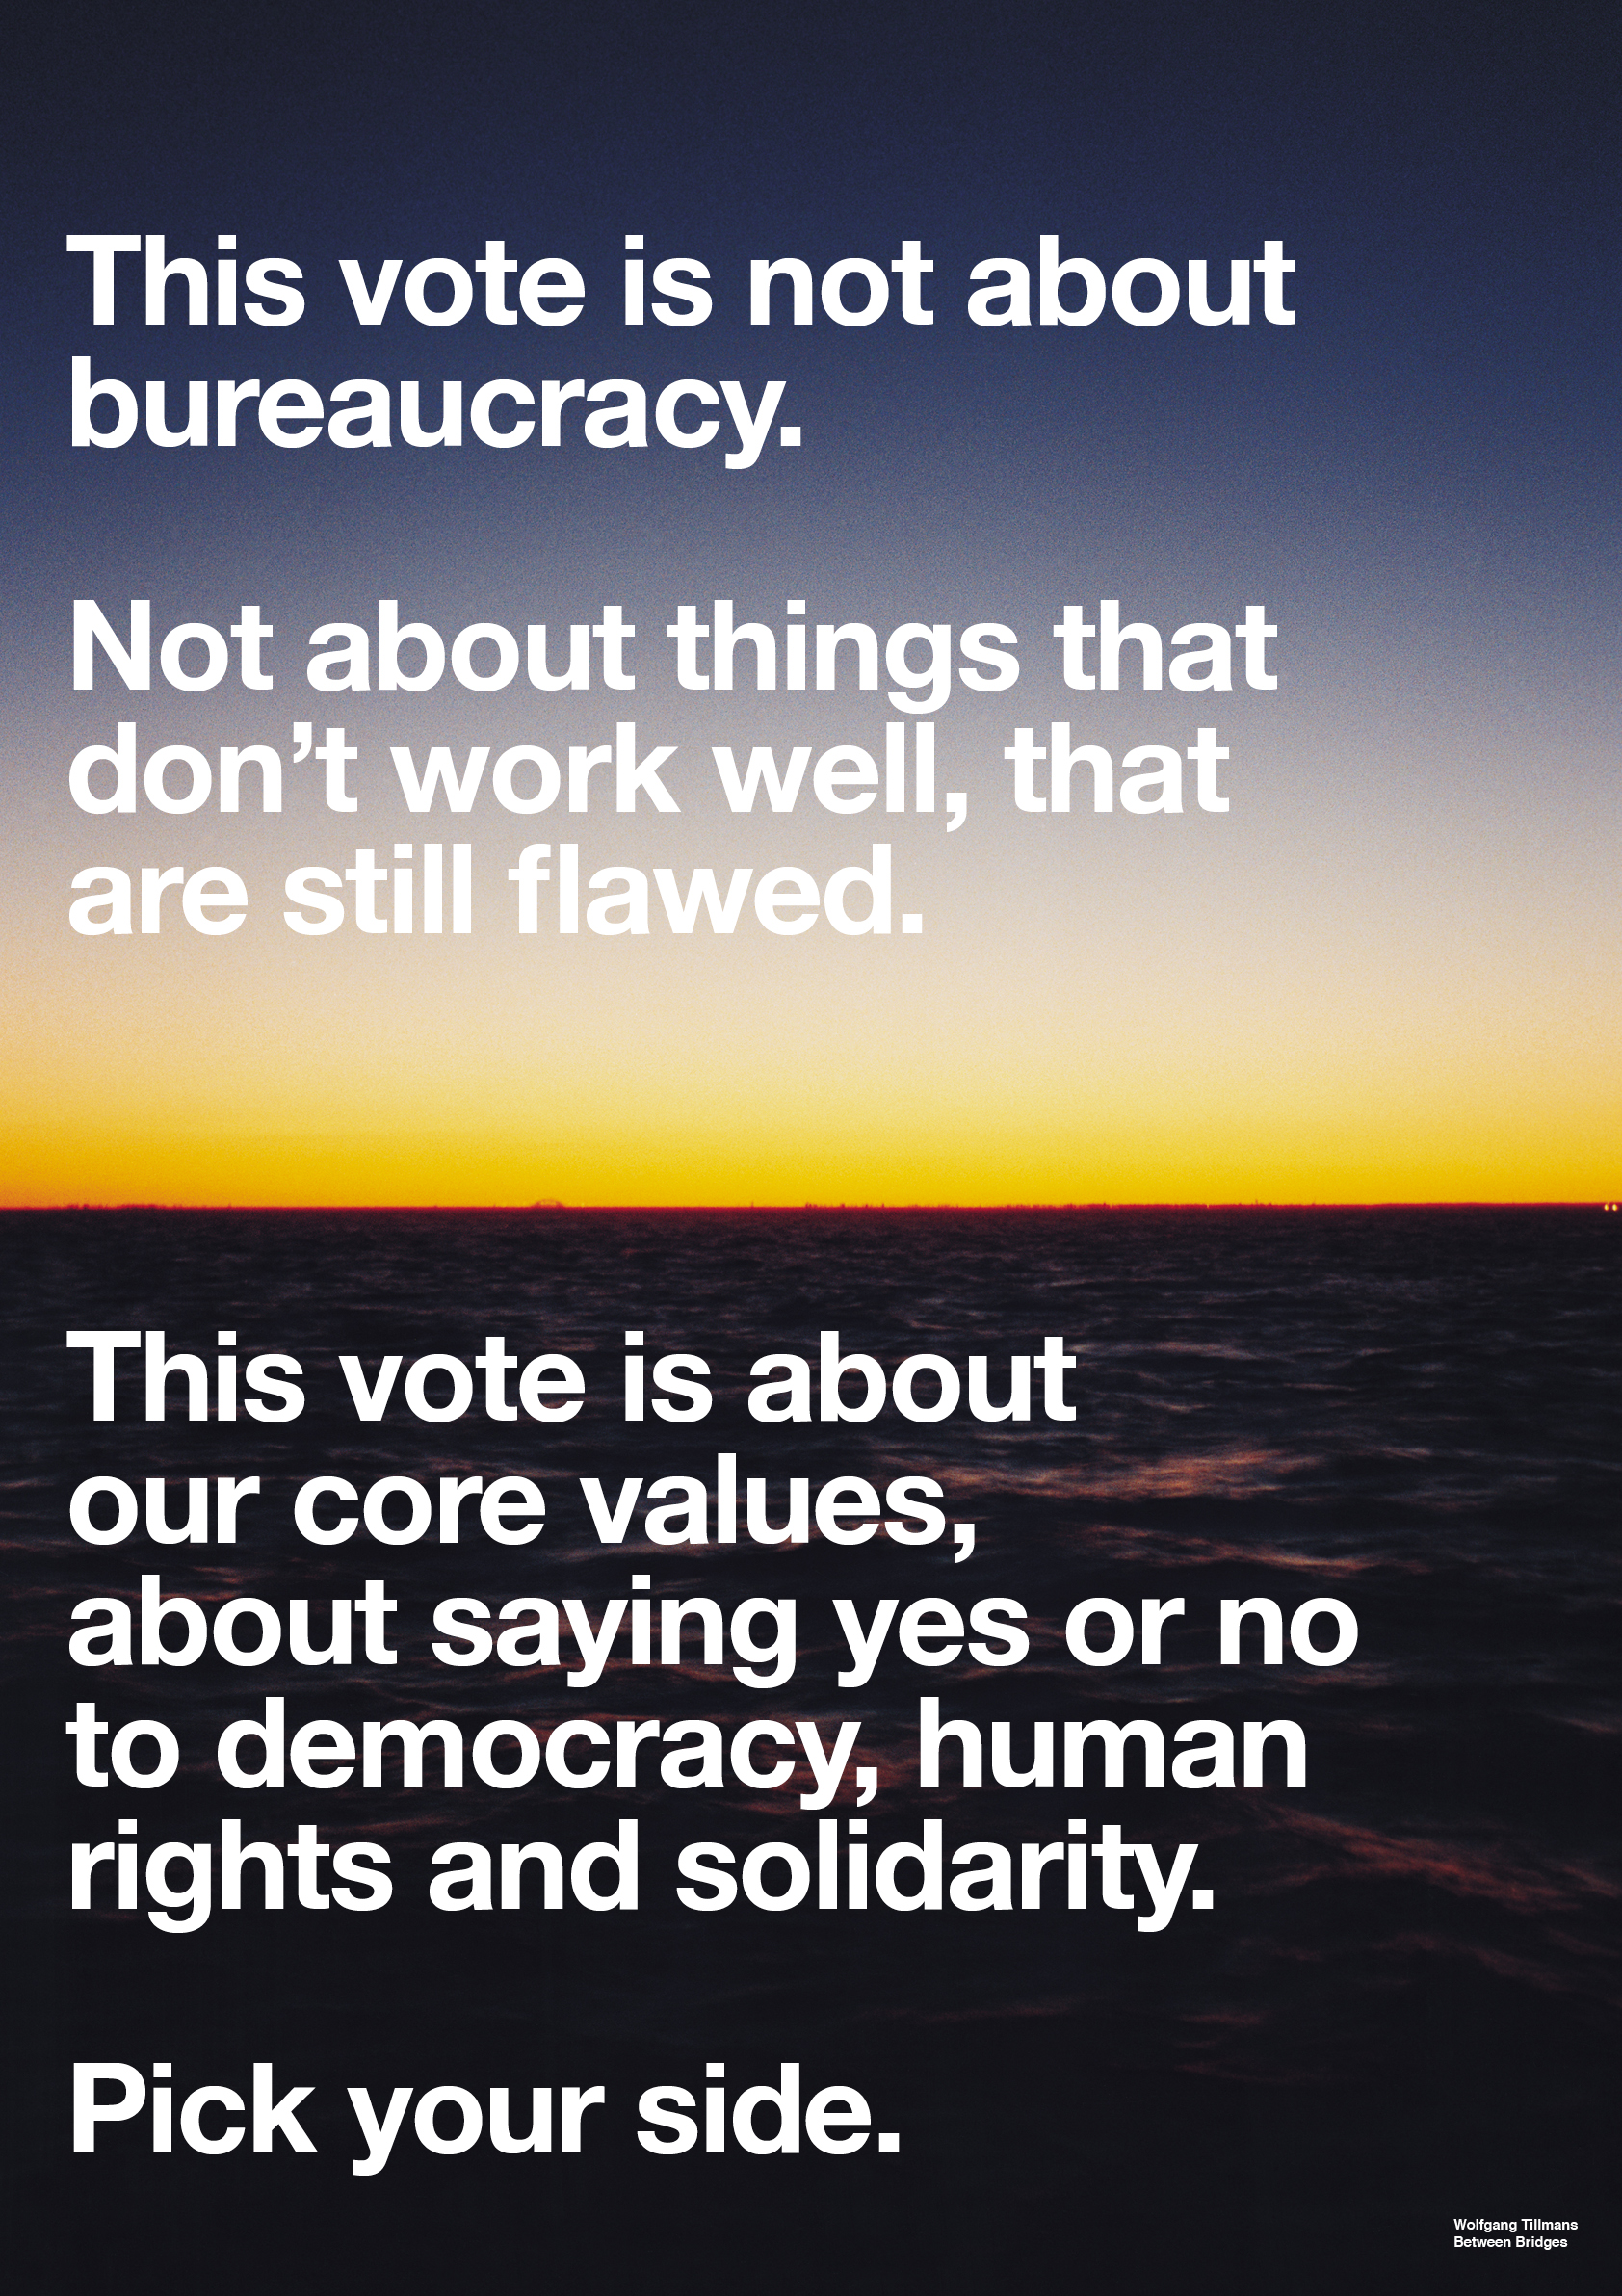 One of Wolfgang Tillmans' EU campaign posters